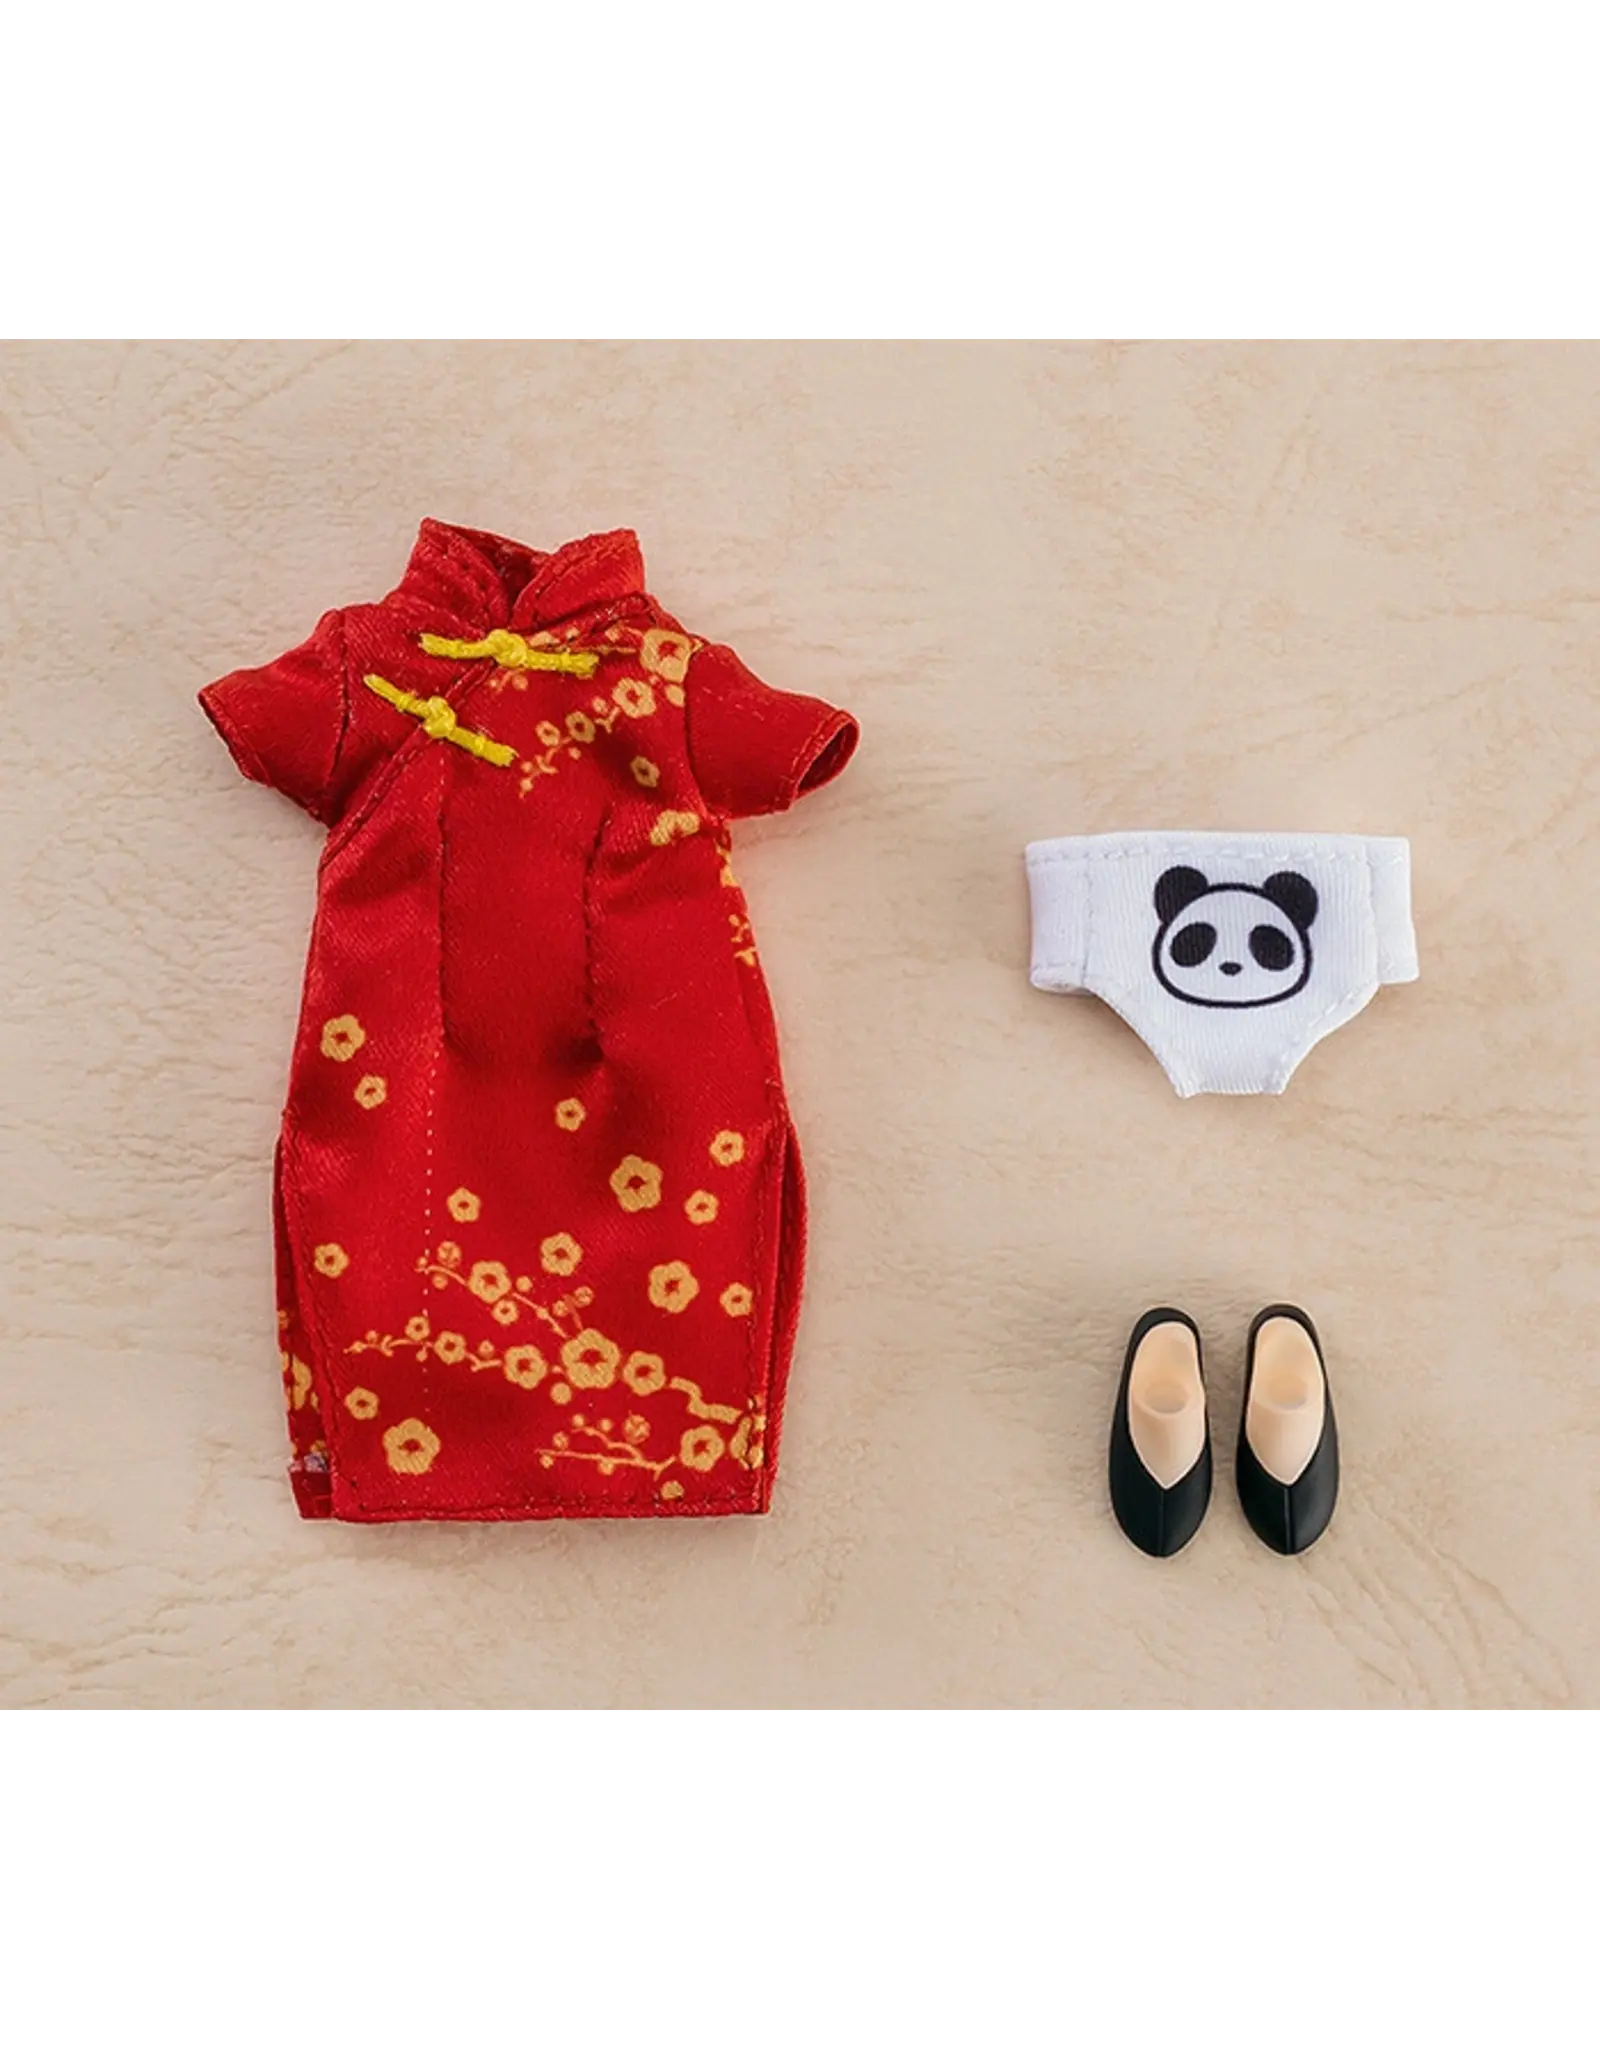 Nendoroid Doll Outfit Chinese Dress Red